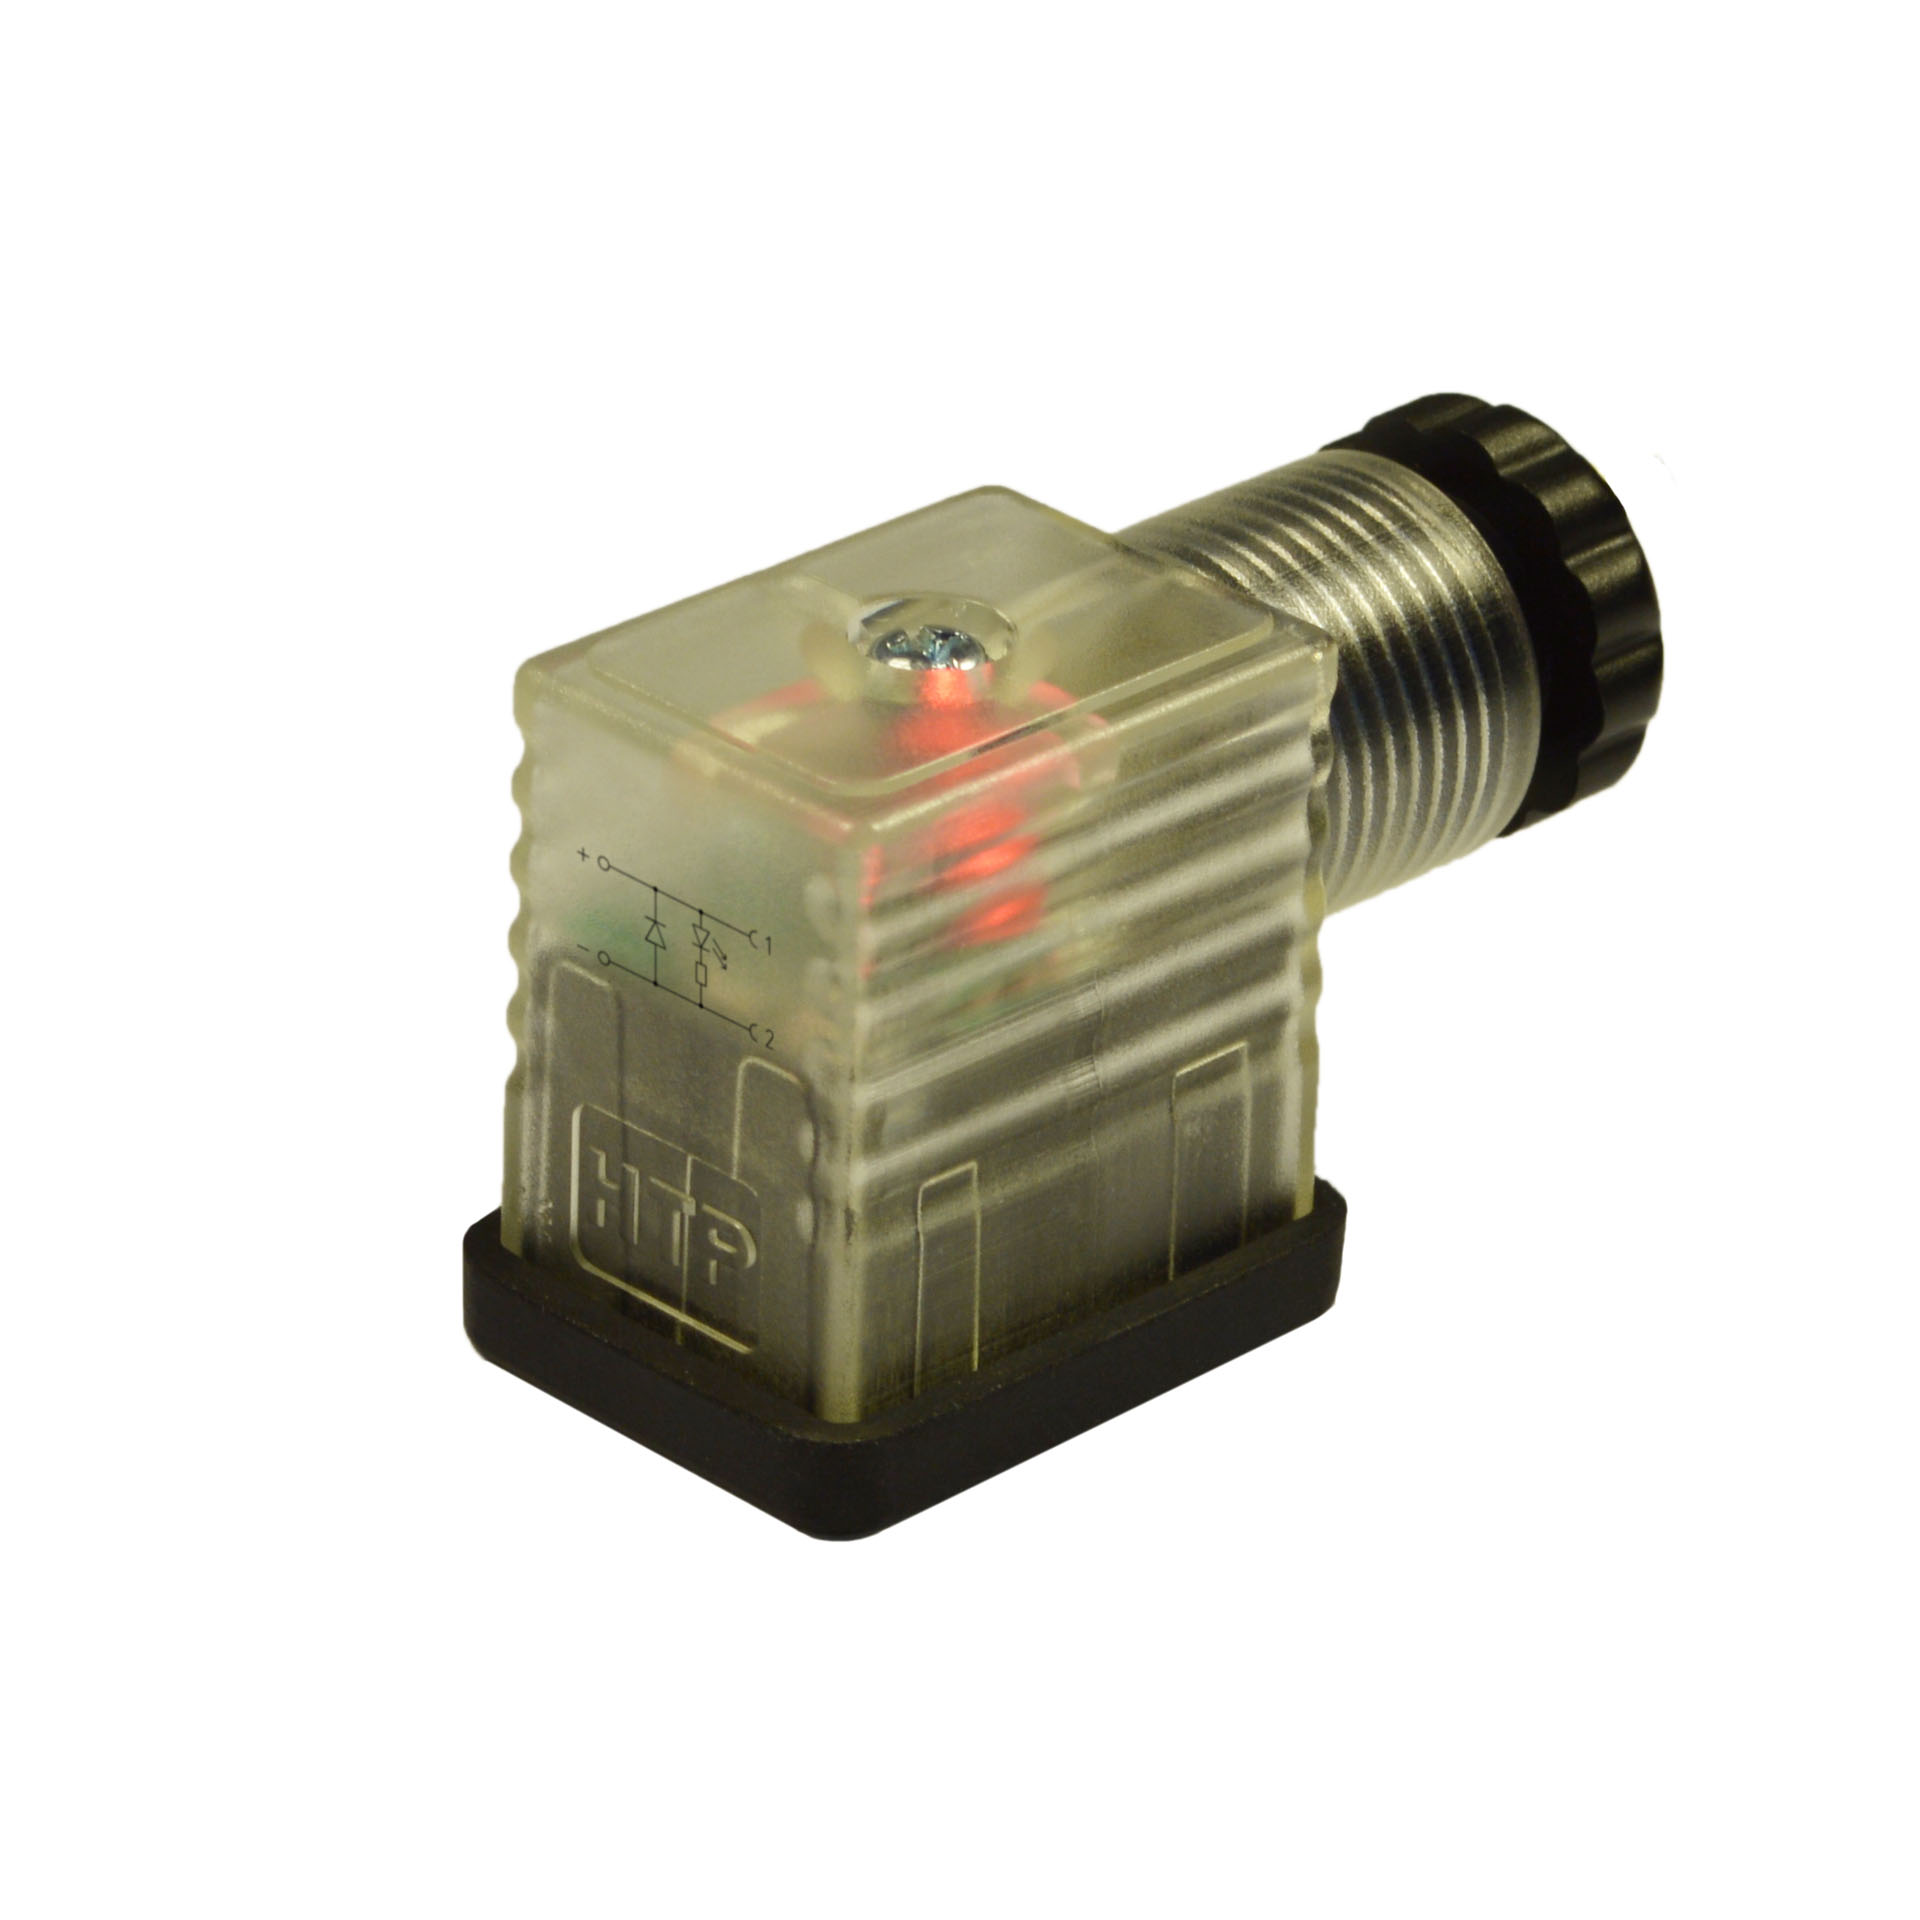 Industrial standard(typeB)field attachable,2p+PE(h.12),red LED+diode,24VAC/DC,PG9